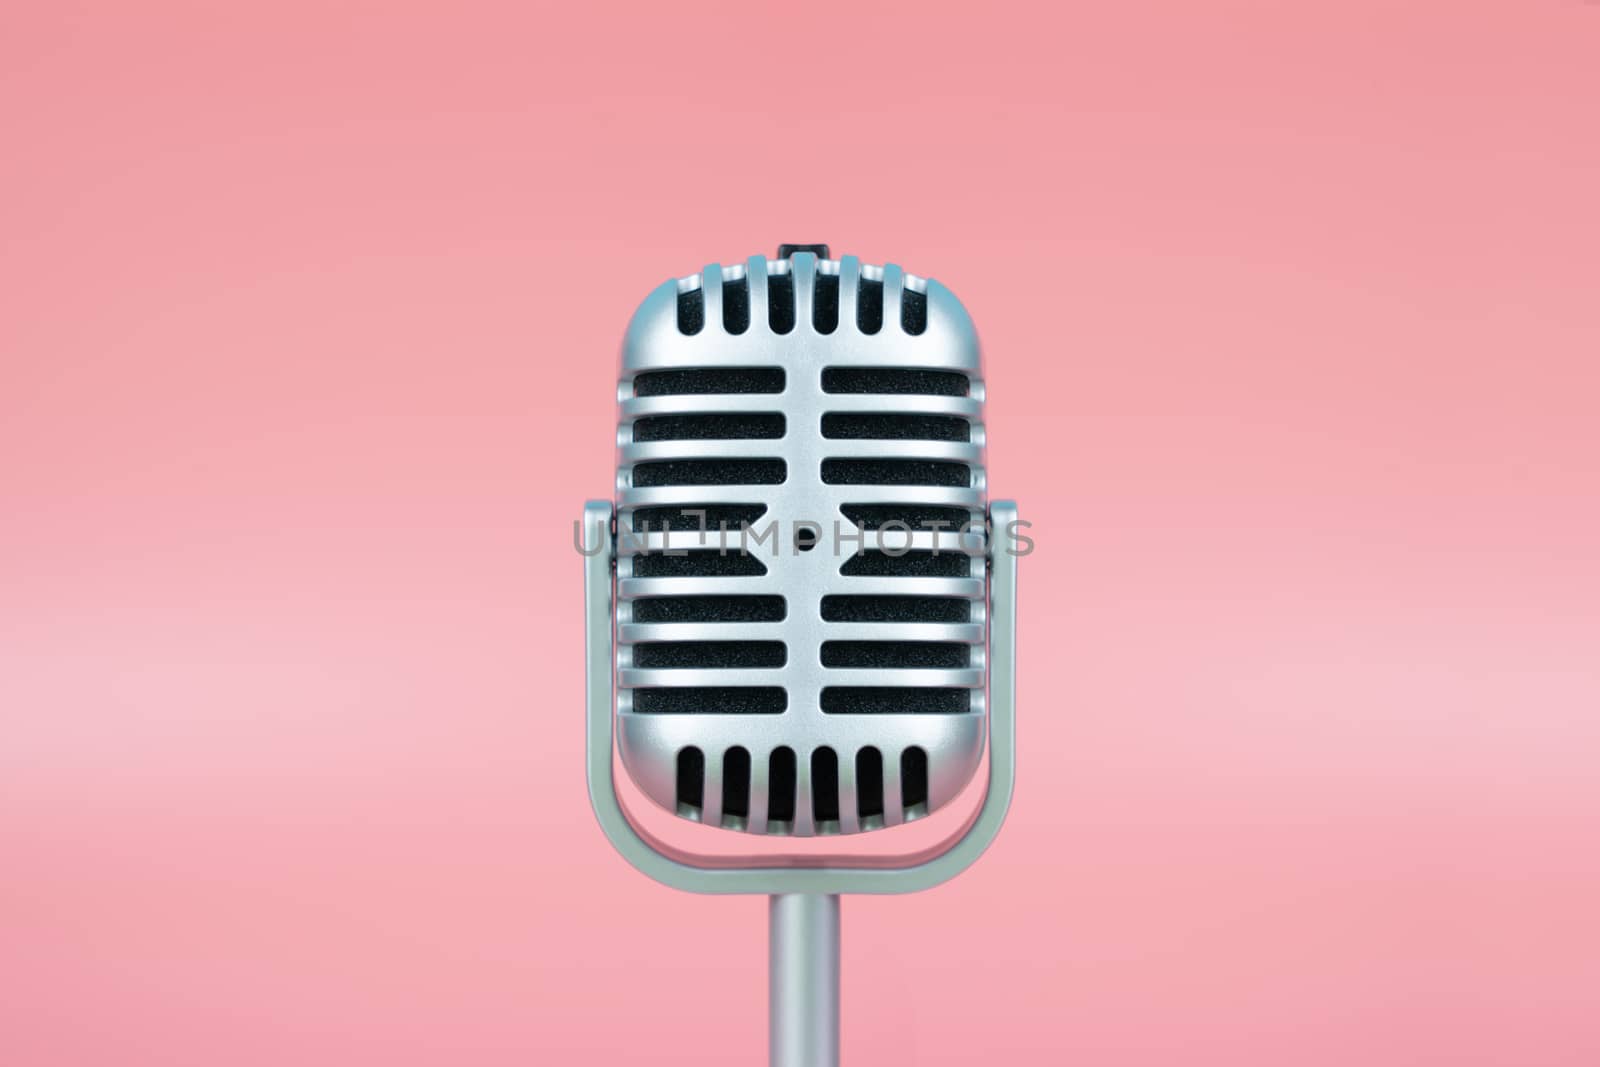 Retro microphone with copy space on pink background